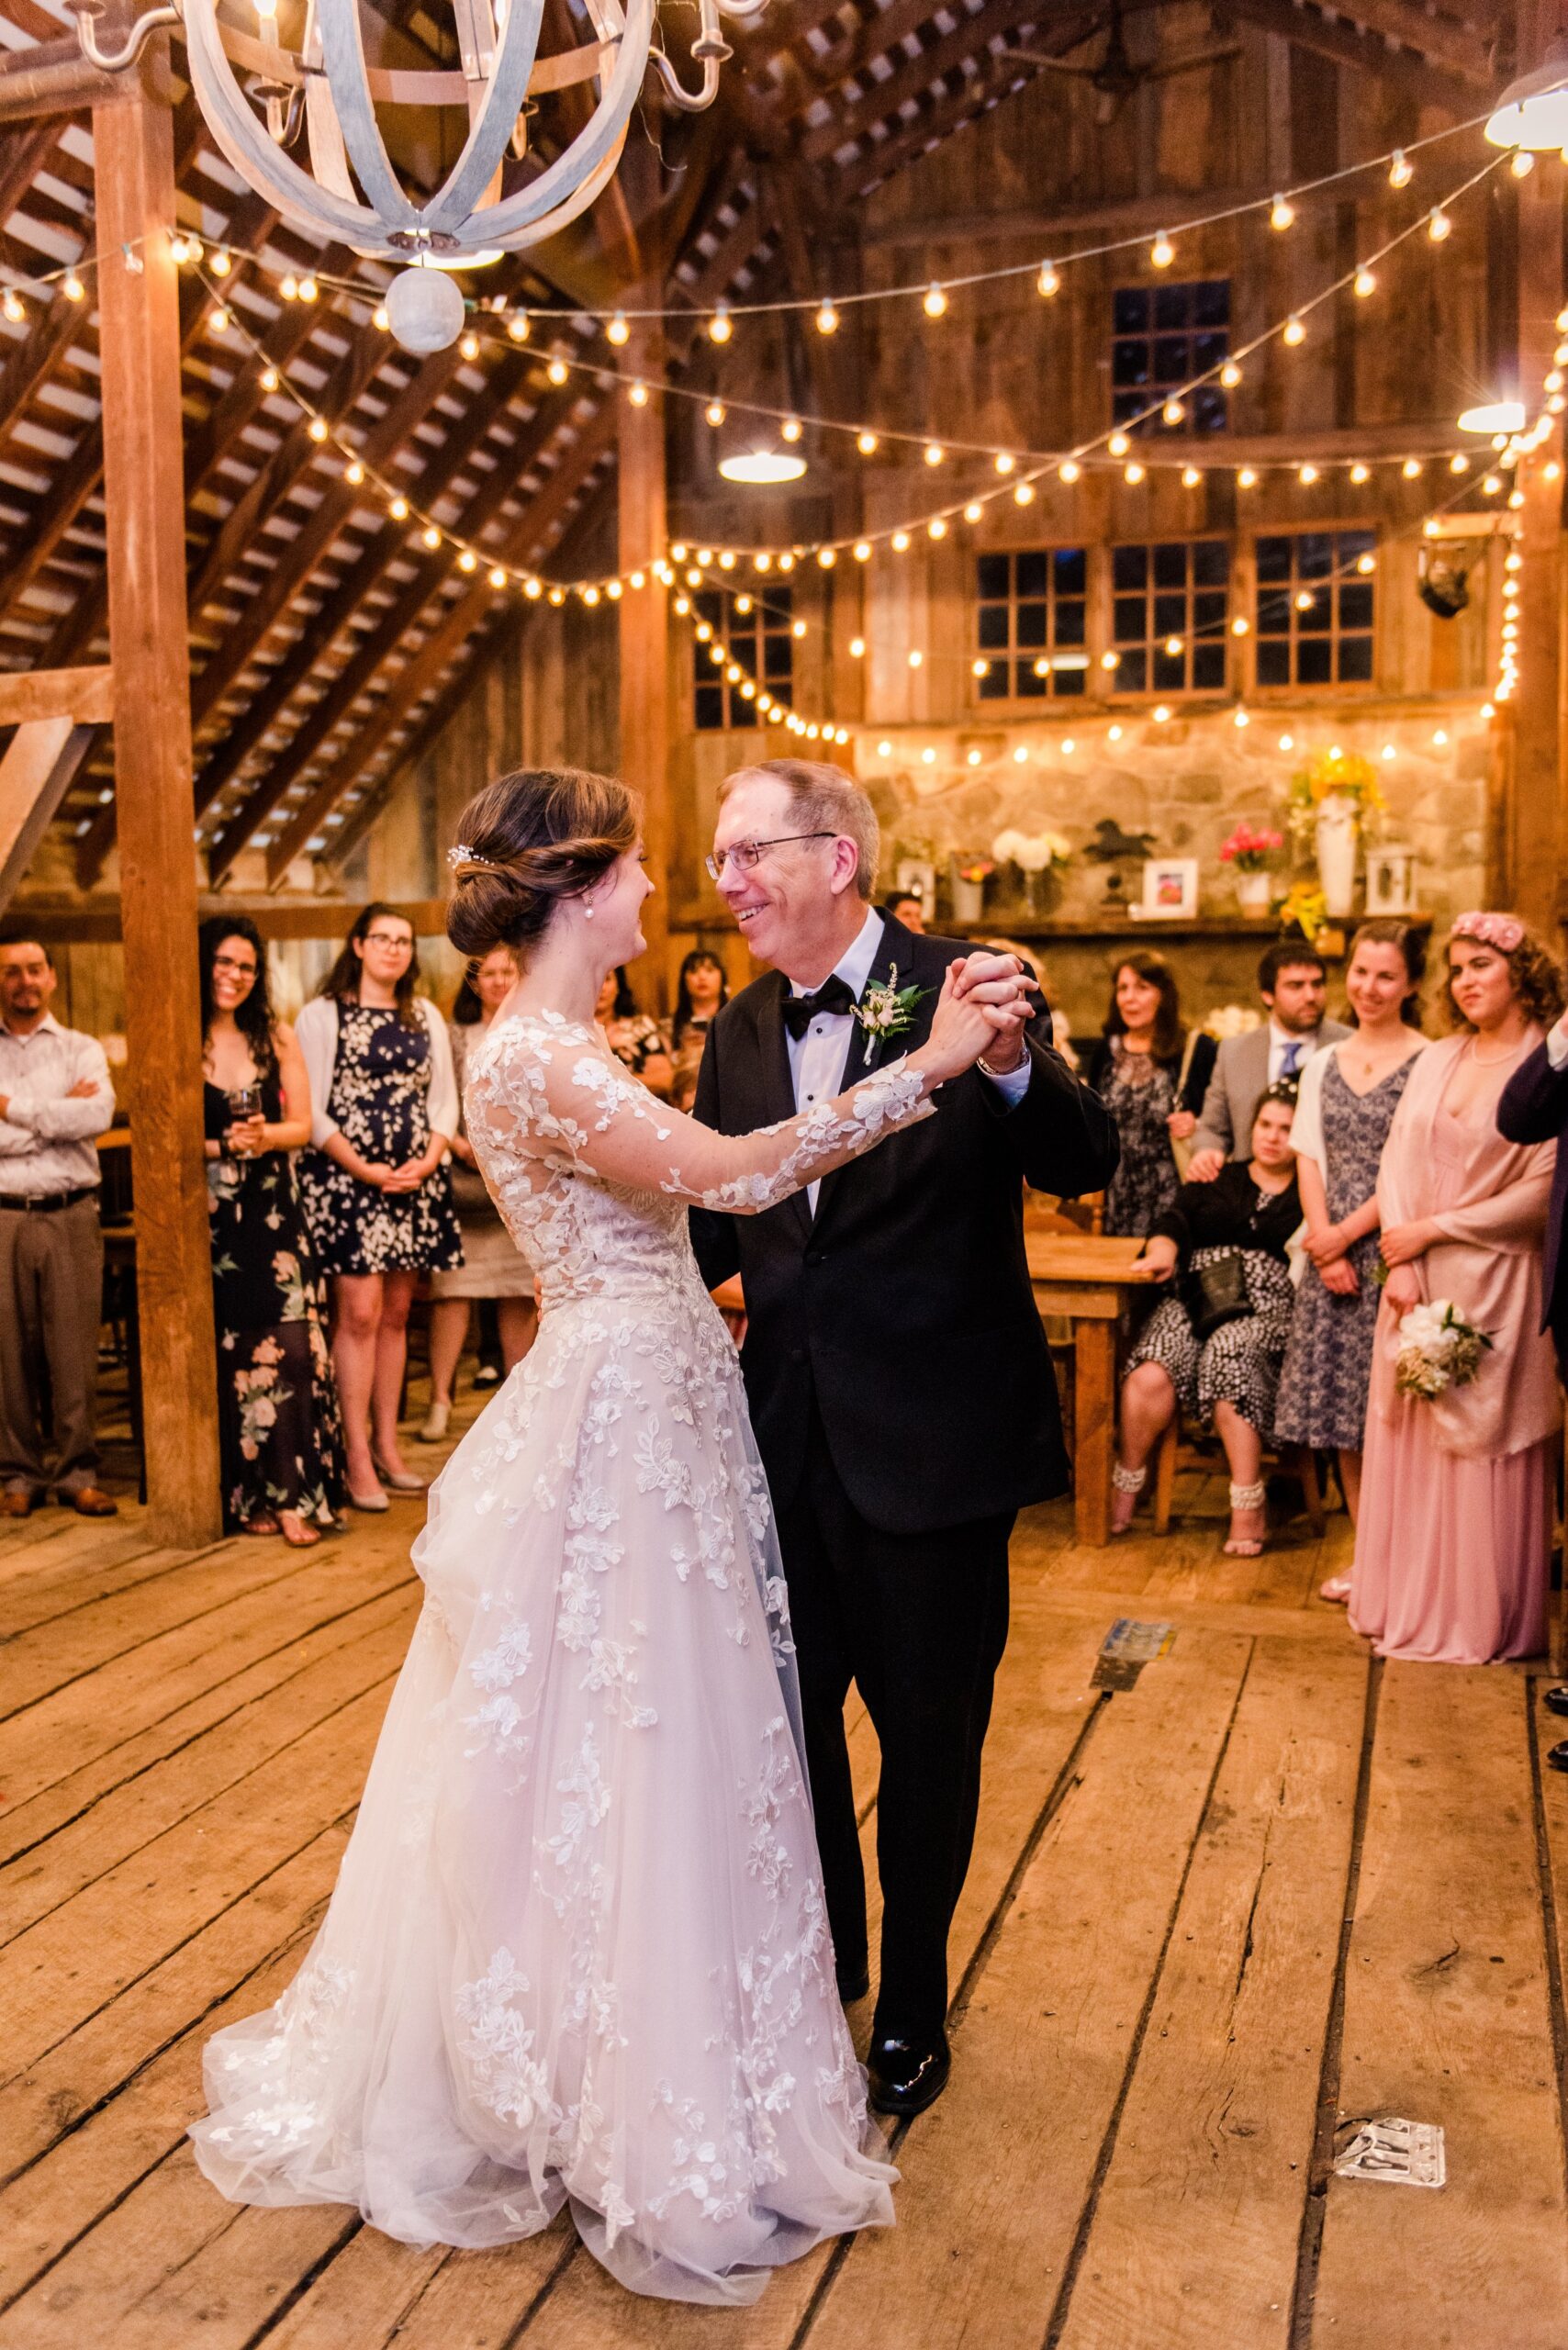 A bride and her father sharing a dance at her wedding reception at The Barns at Hamilton Station Vineyard in Loudoun County Virginia